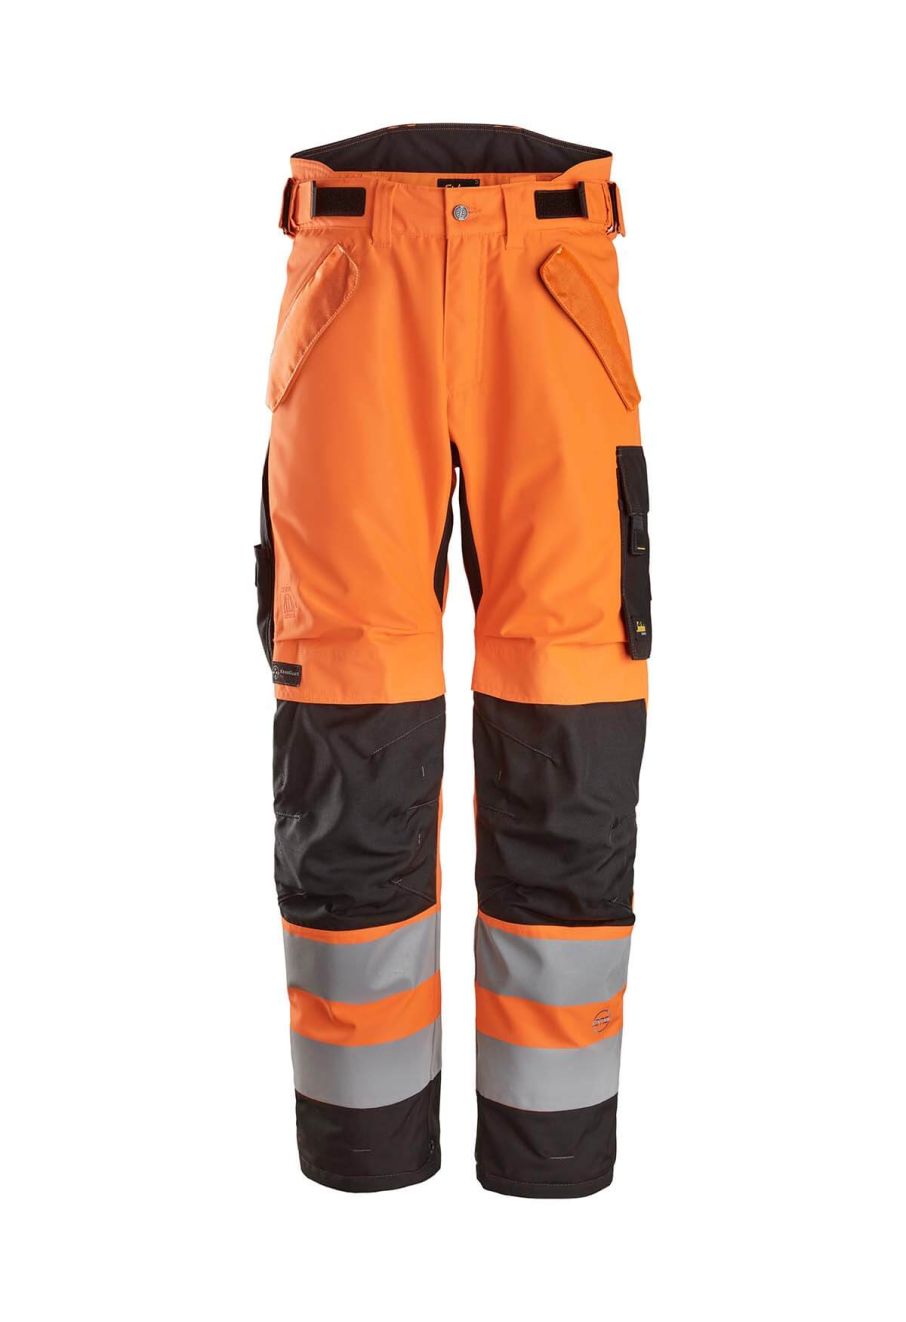 15590-231-14 L Mascot Workwear | 15590-231 Orange Breathable, Lightweight  Hi Vis Work Trousers, 37in Waist Size | 264-7499 | RS Components